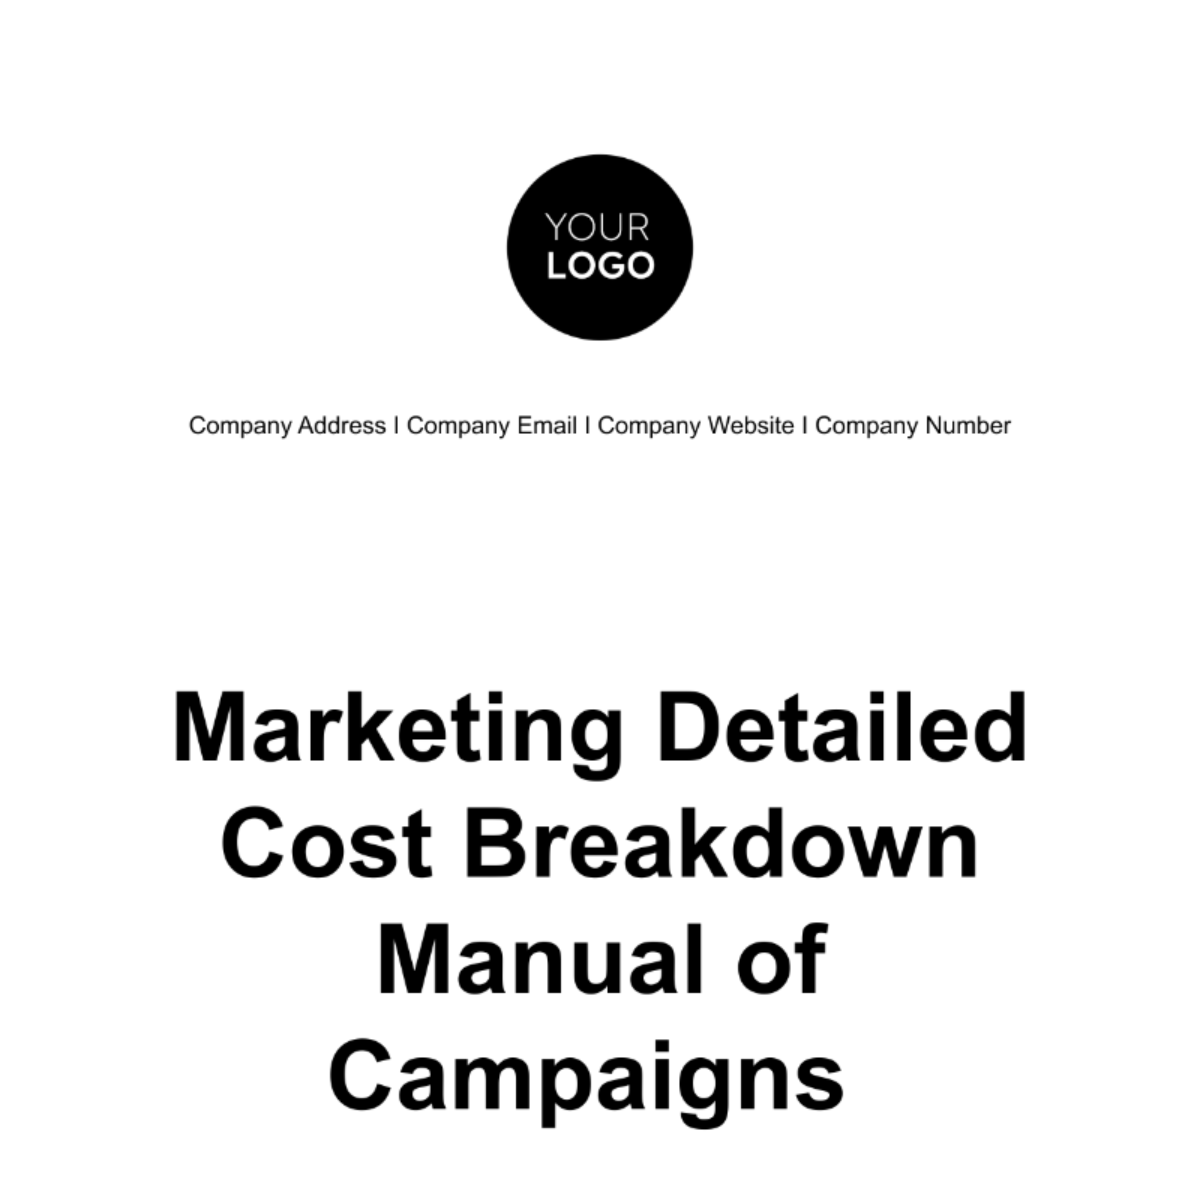 Marketing Detailed Cost Breakdown Manual of Campaigns Template